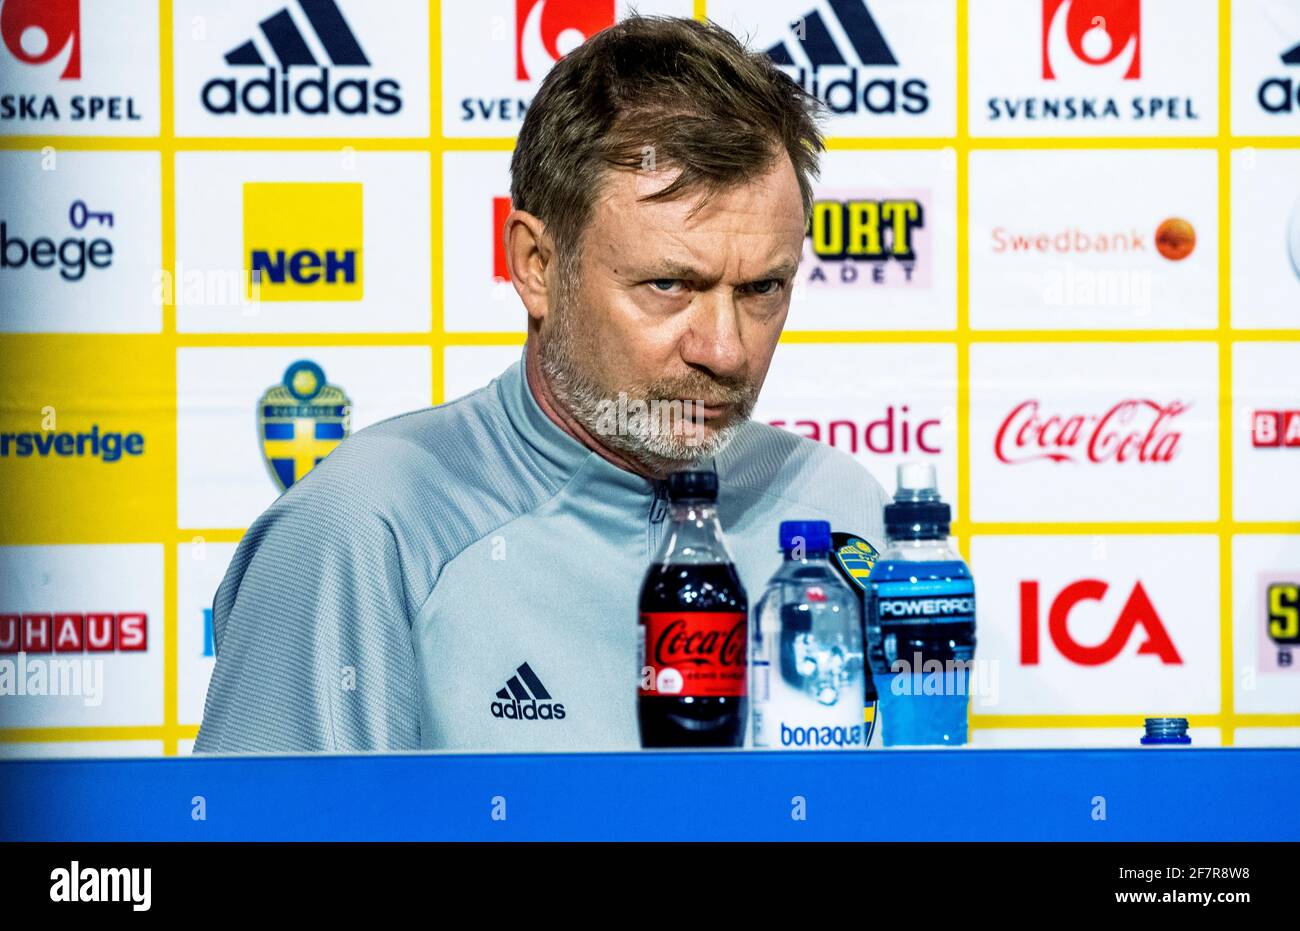 SOLNA  20210409 Sweden's head coach Peter Gerhardsson, speaks at a news conference after the women's national team's training at Friends arena on Friday April 9,2021, prior the friendly international game against the USA on Saturday.   Photo: Claudio Bresciani / TT / Kod 10090 Stock Photo